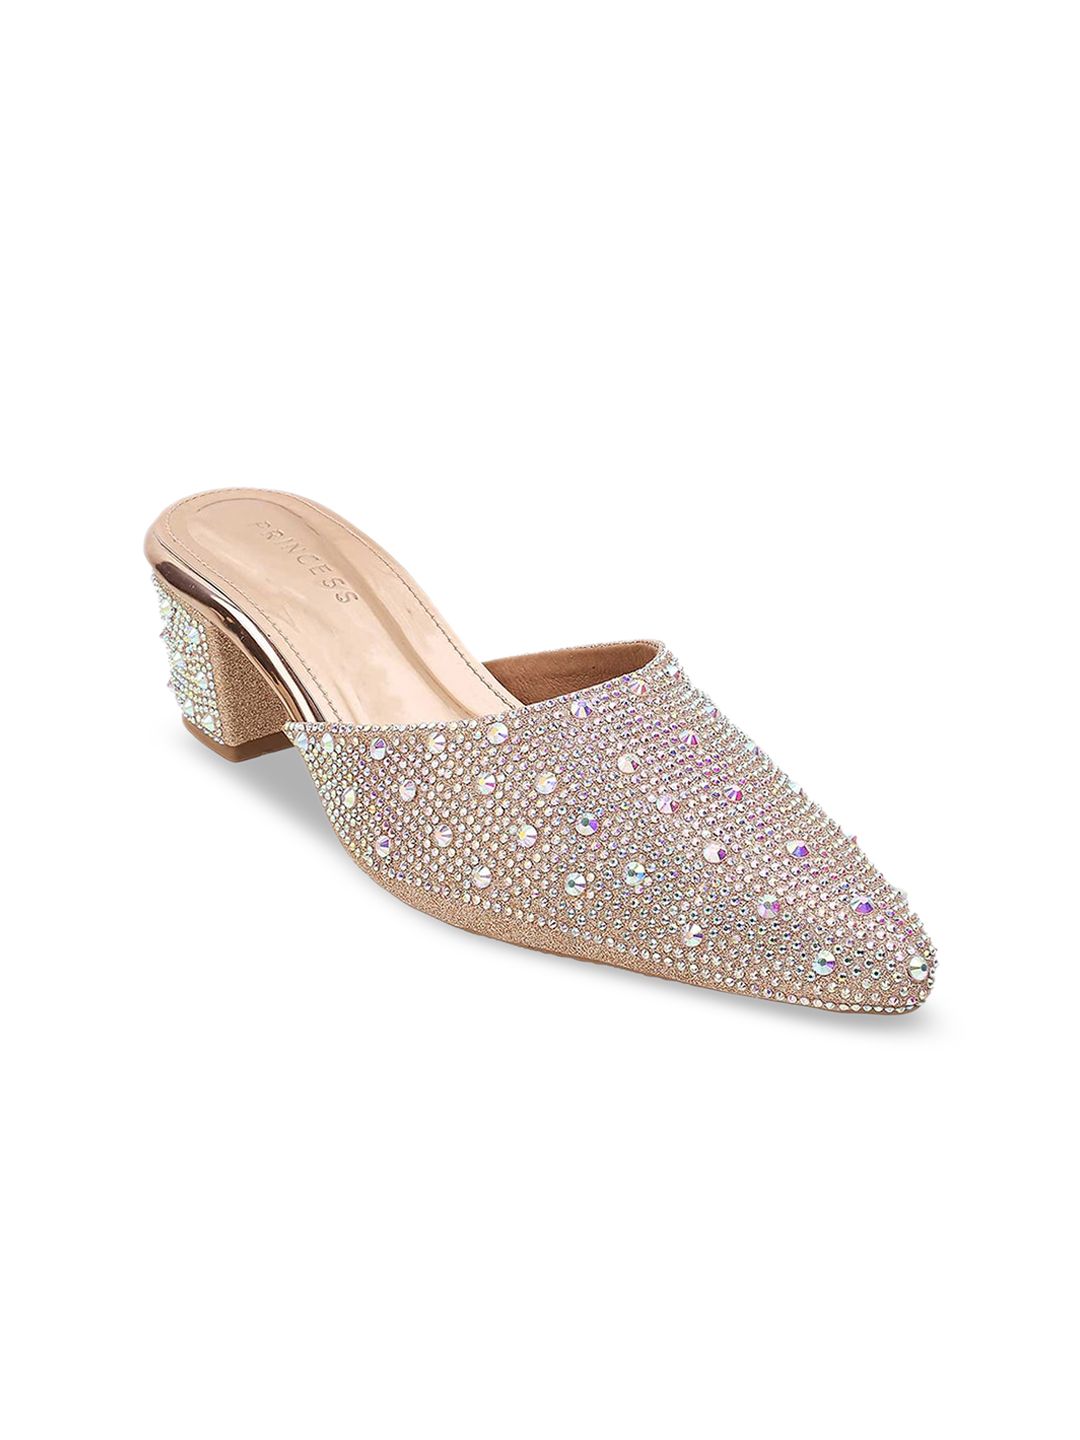 Metro Pink Textured Block Mules With Western Embellishments Price in India